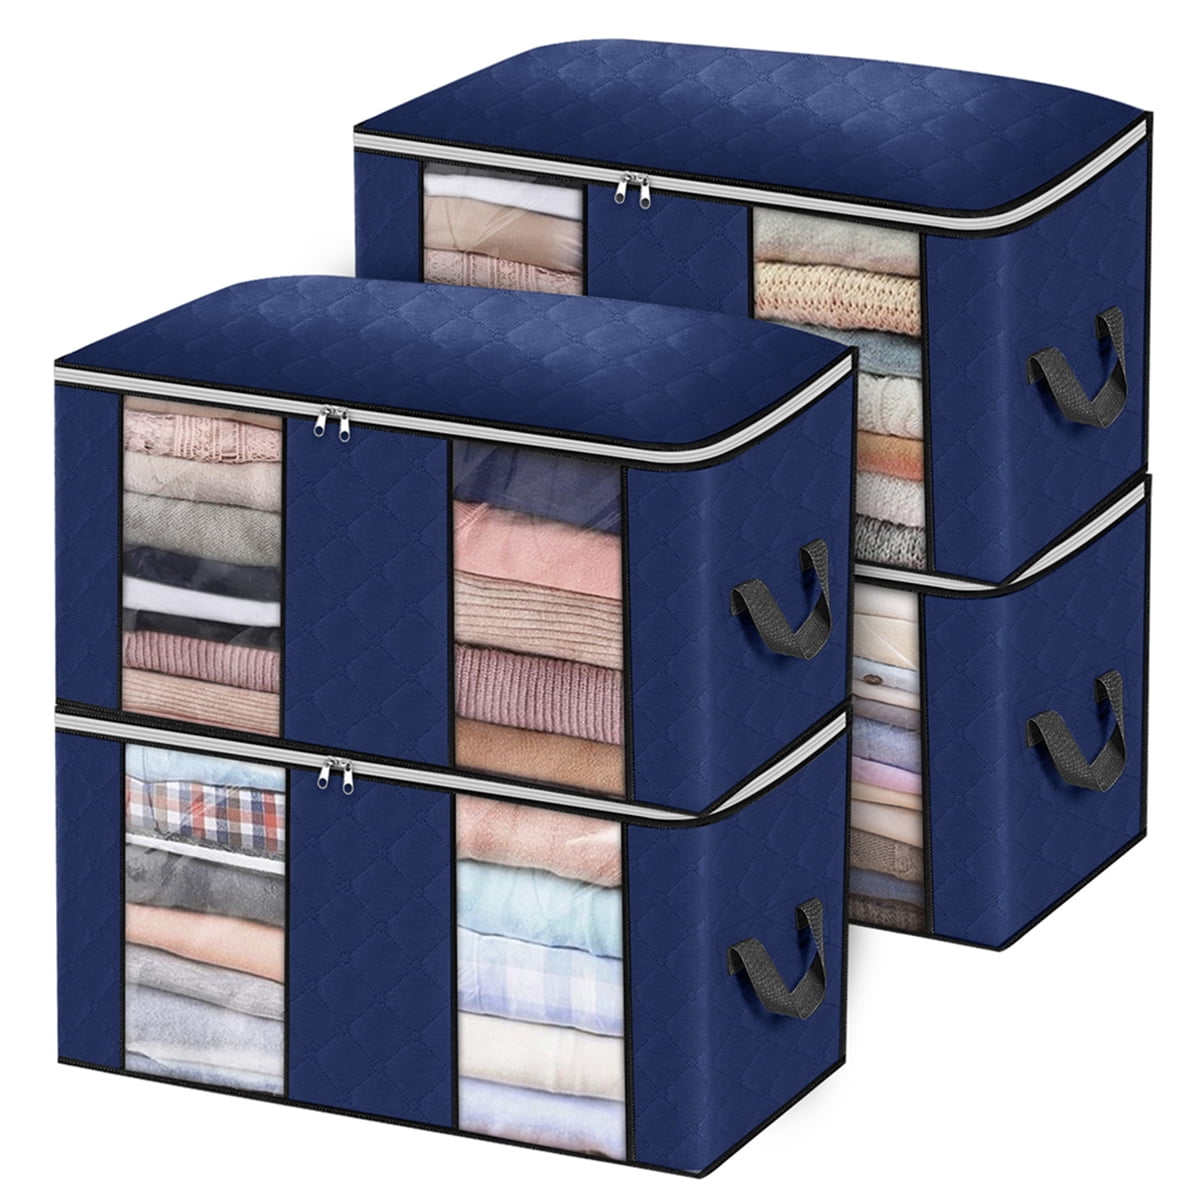 6 Pack Clothes Storage Bags, Upgraded Foldable Fabric Storage Bags, Storage  Containers For Organizing Bedroom, Closet, Clothing, Comforter, Blankets